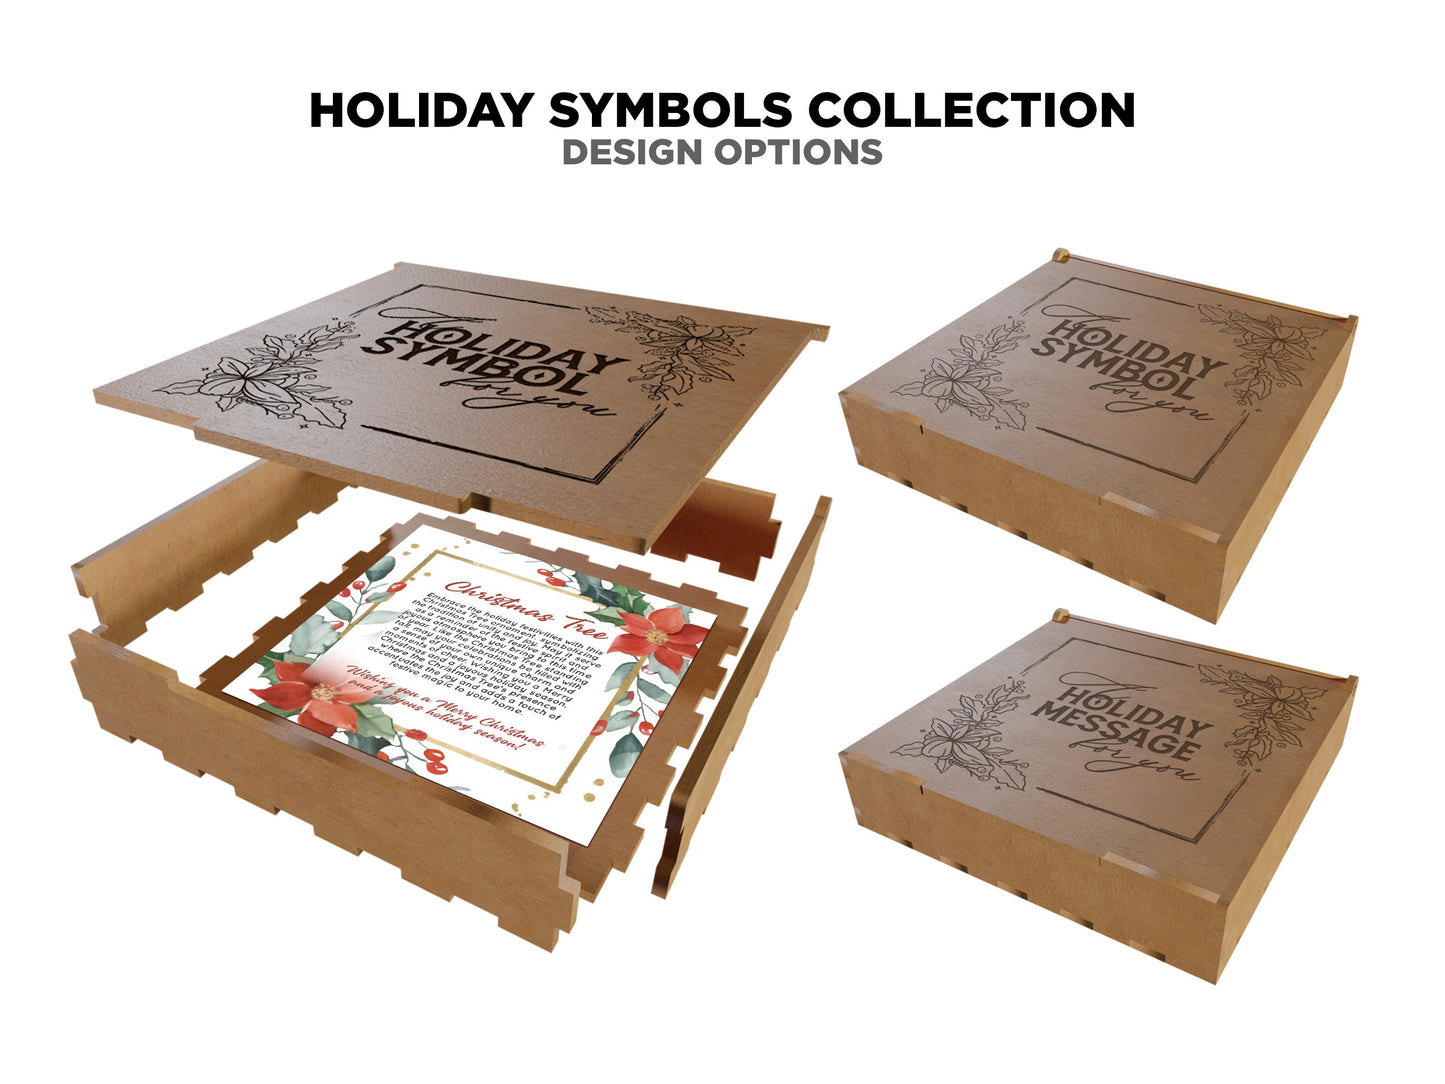 Holiday Symbol Collection - 15 Symbol Ornaments - 15 Prints - 2 Box Designs - SVG, PDF, AI File Download - Glowforge and Lightburn Tested